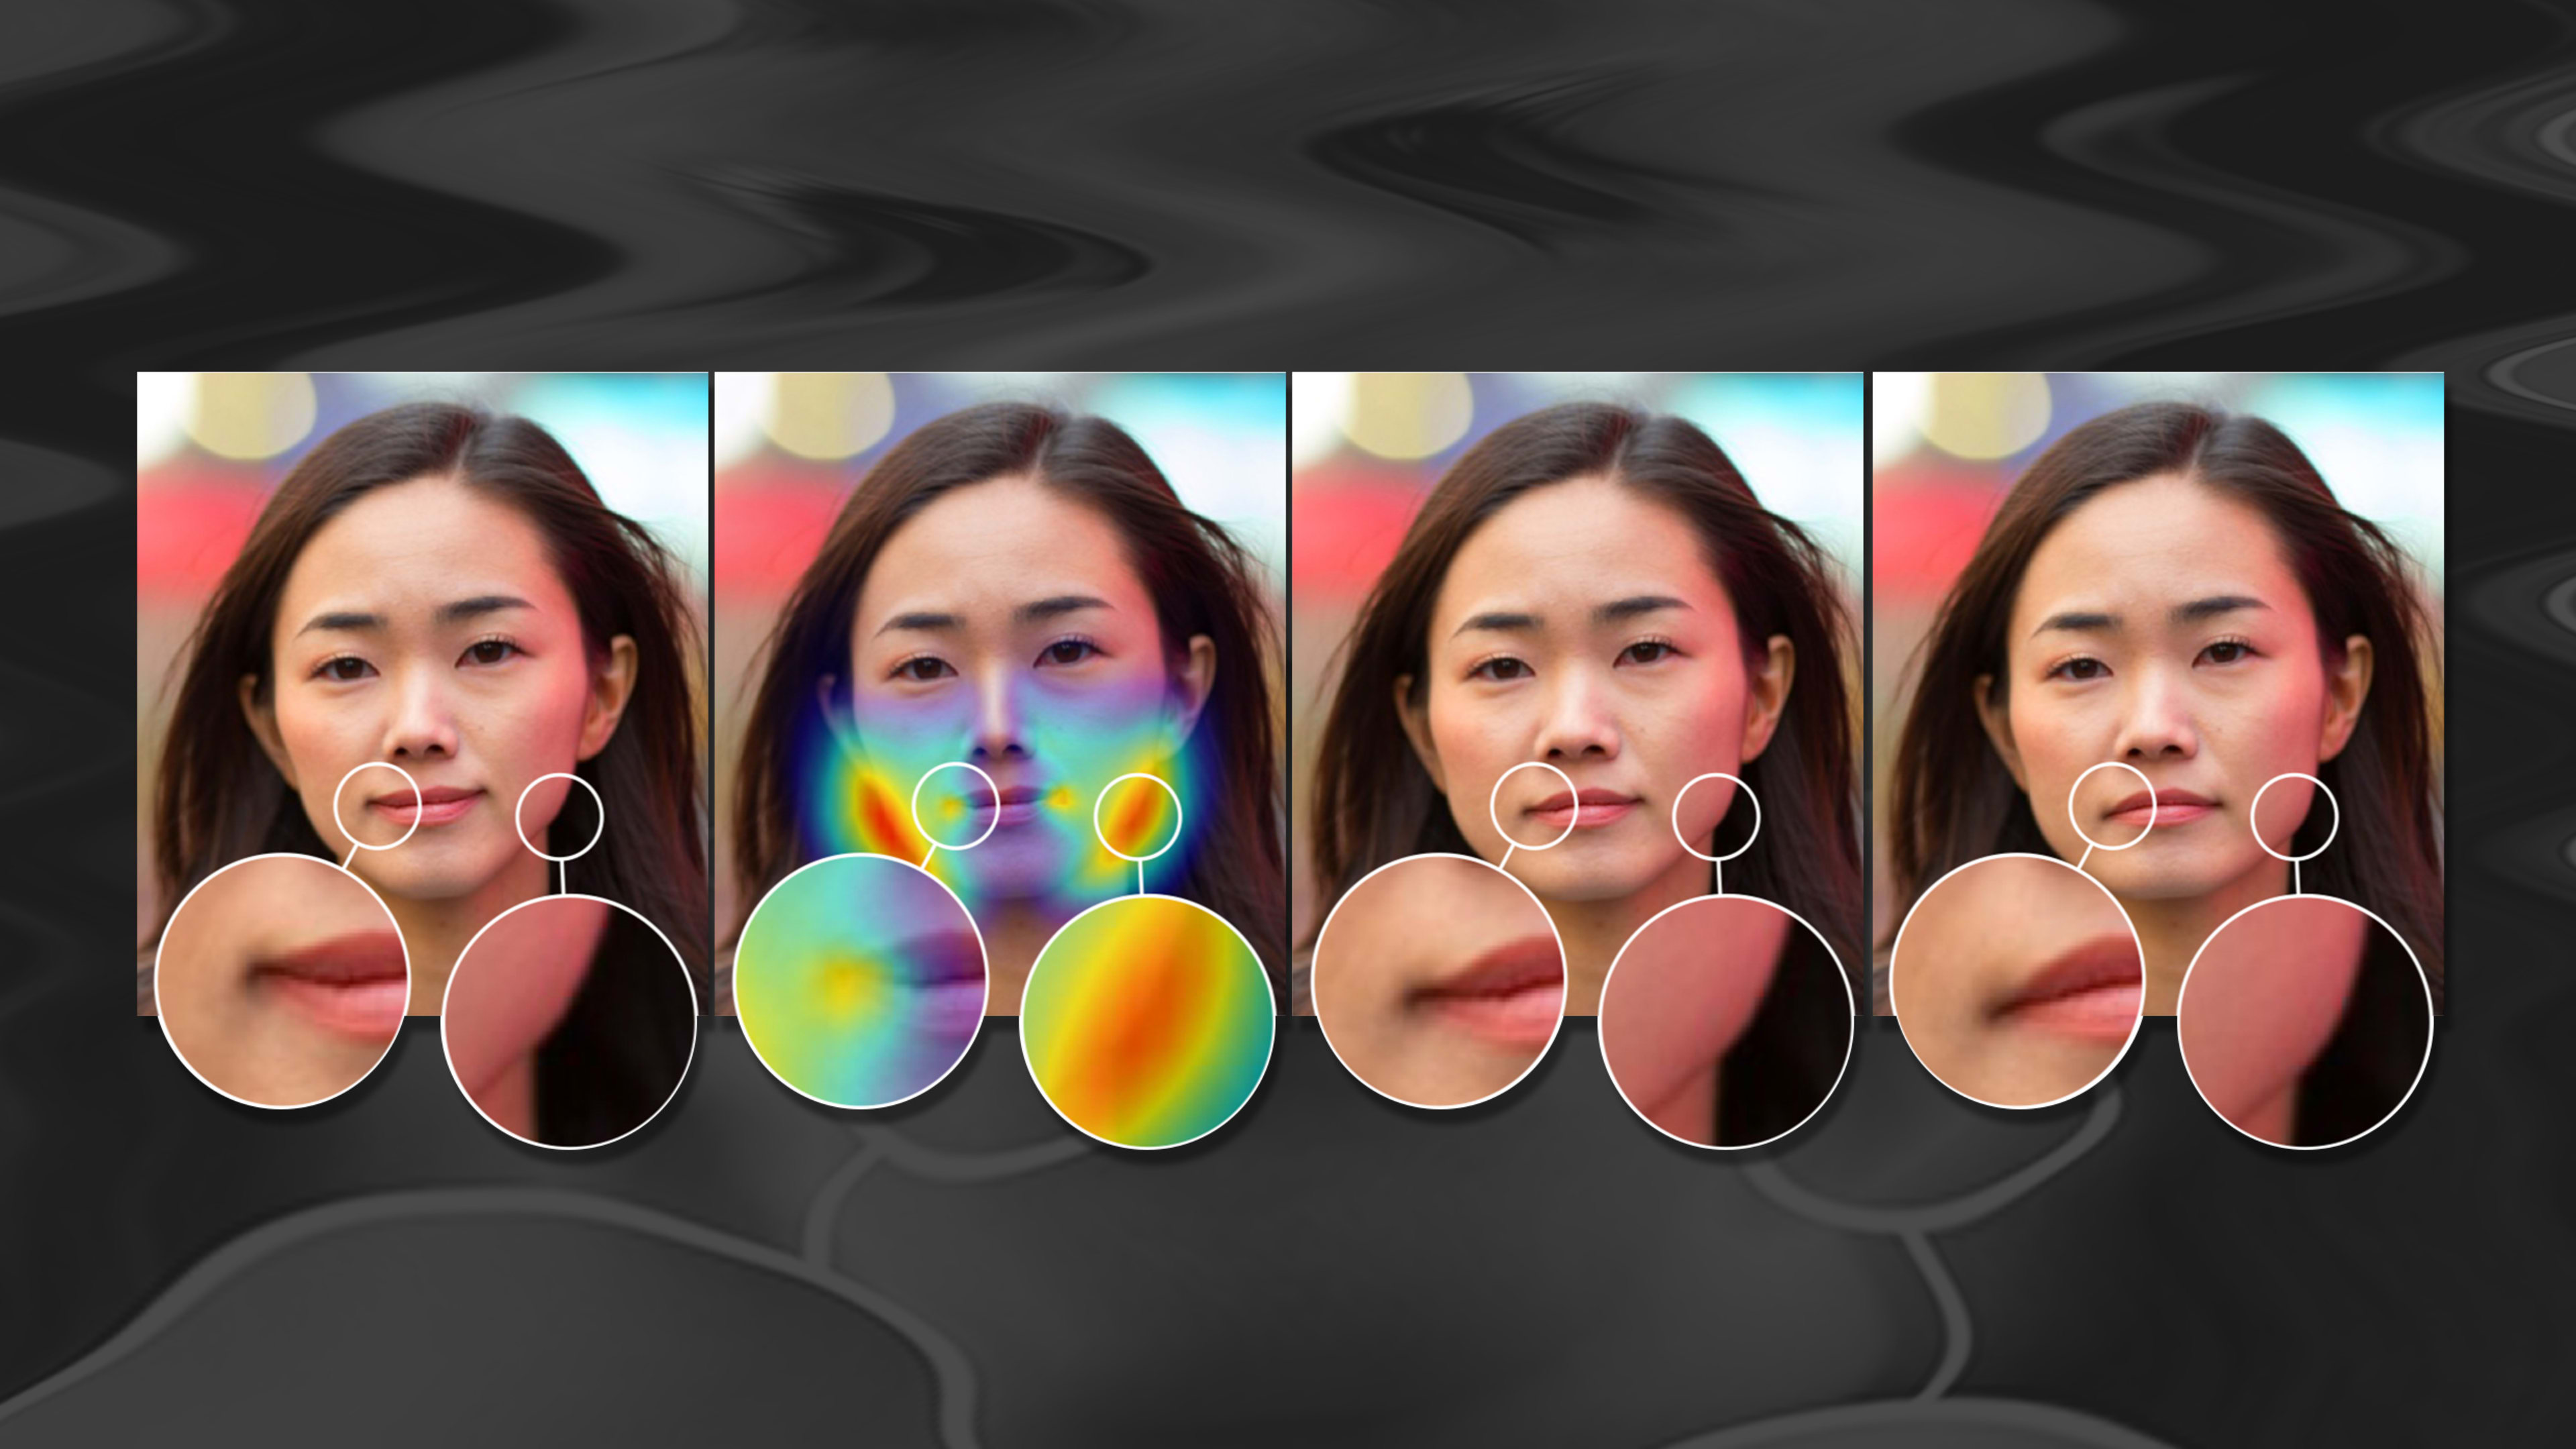 Adobe has an ambitious plan to help the public spot fake images